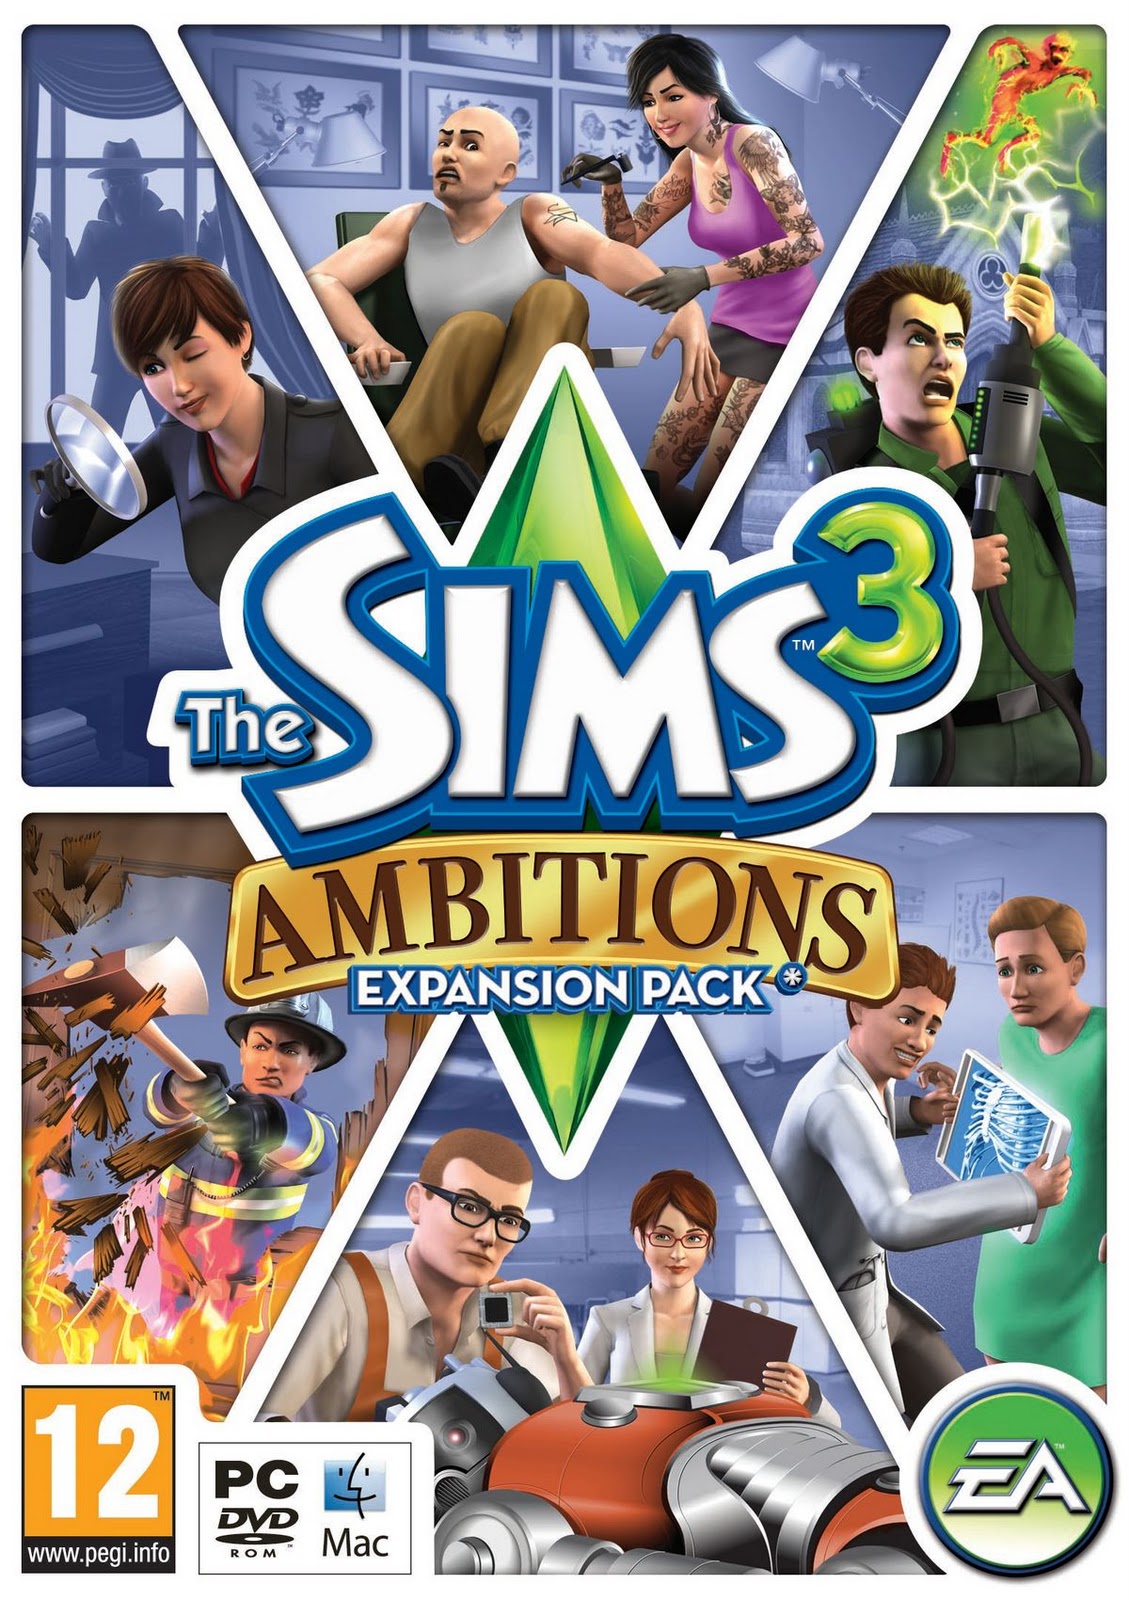 Sims 3 Expansion Pack Sets